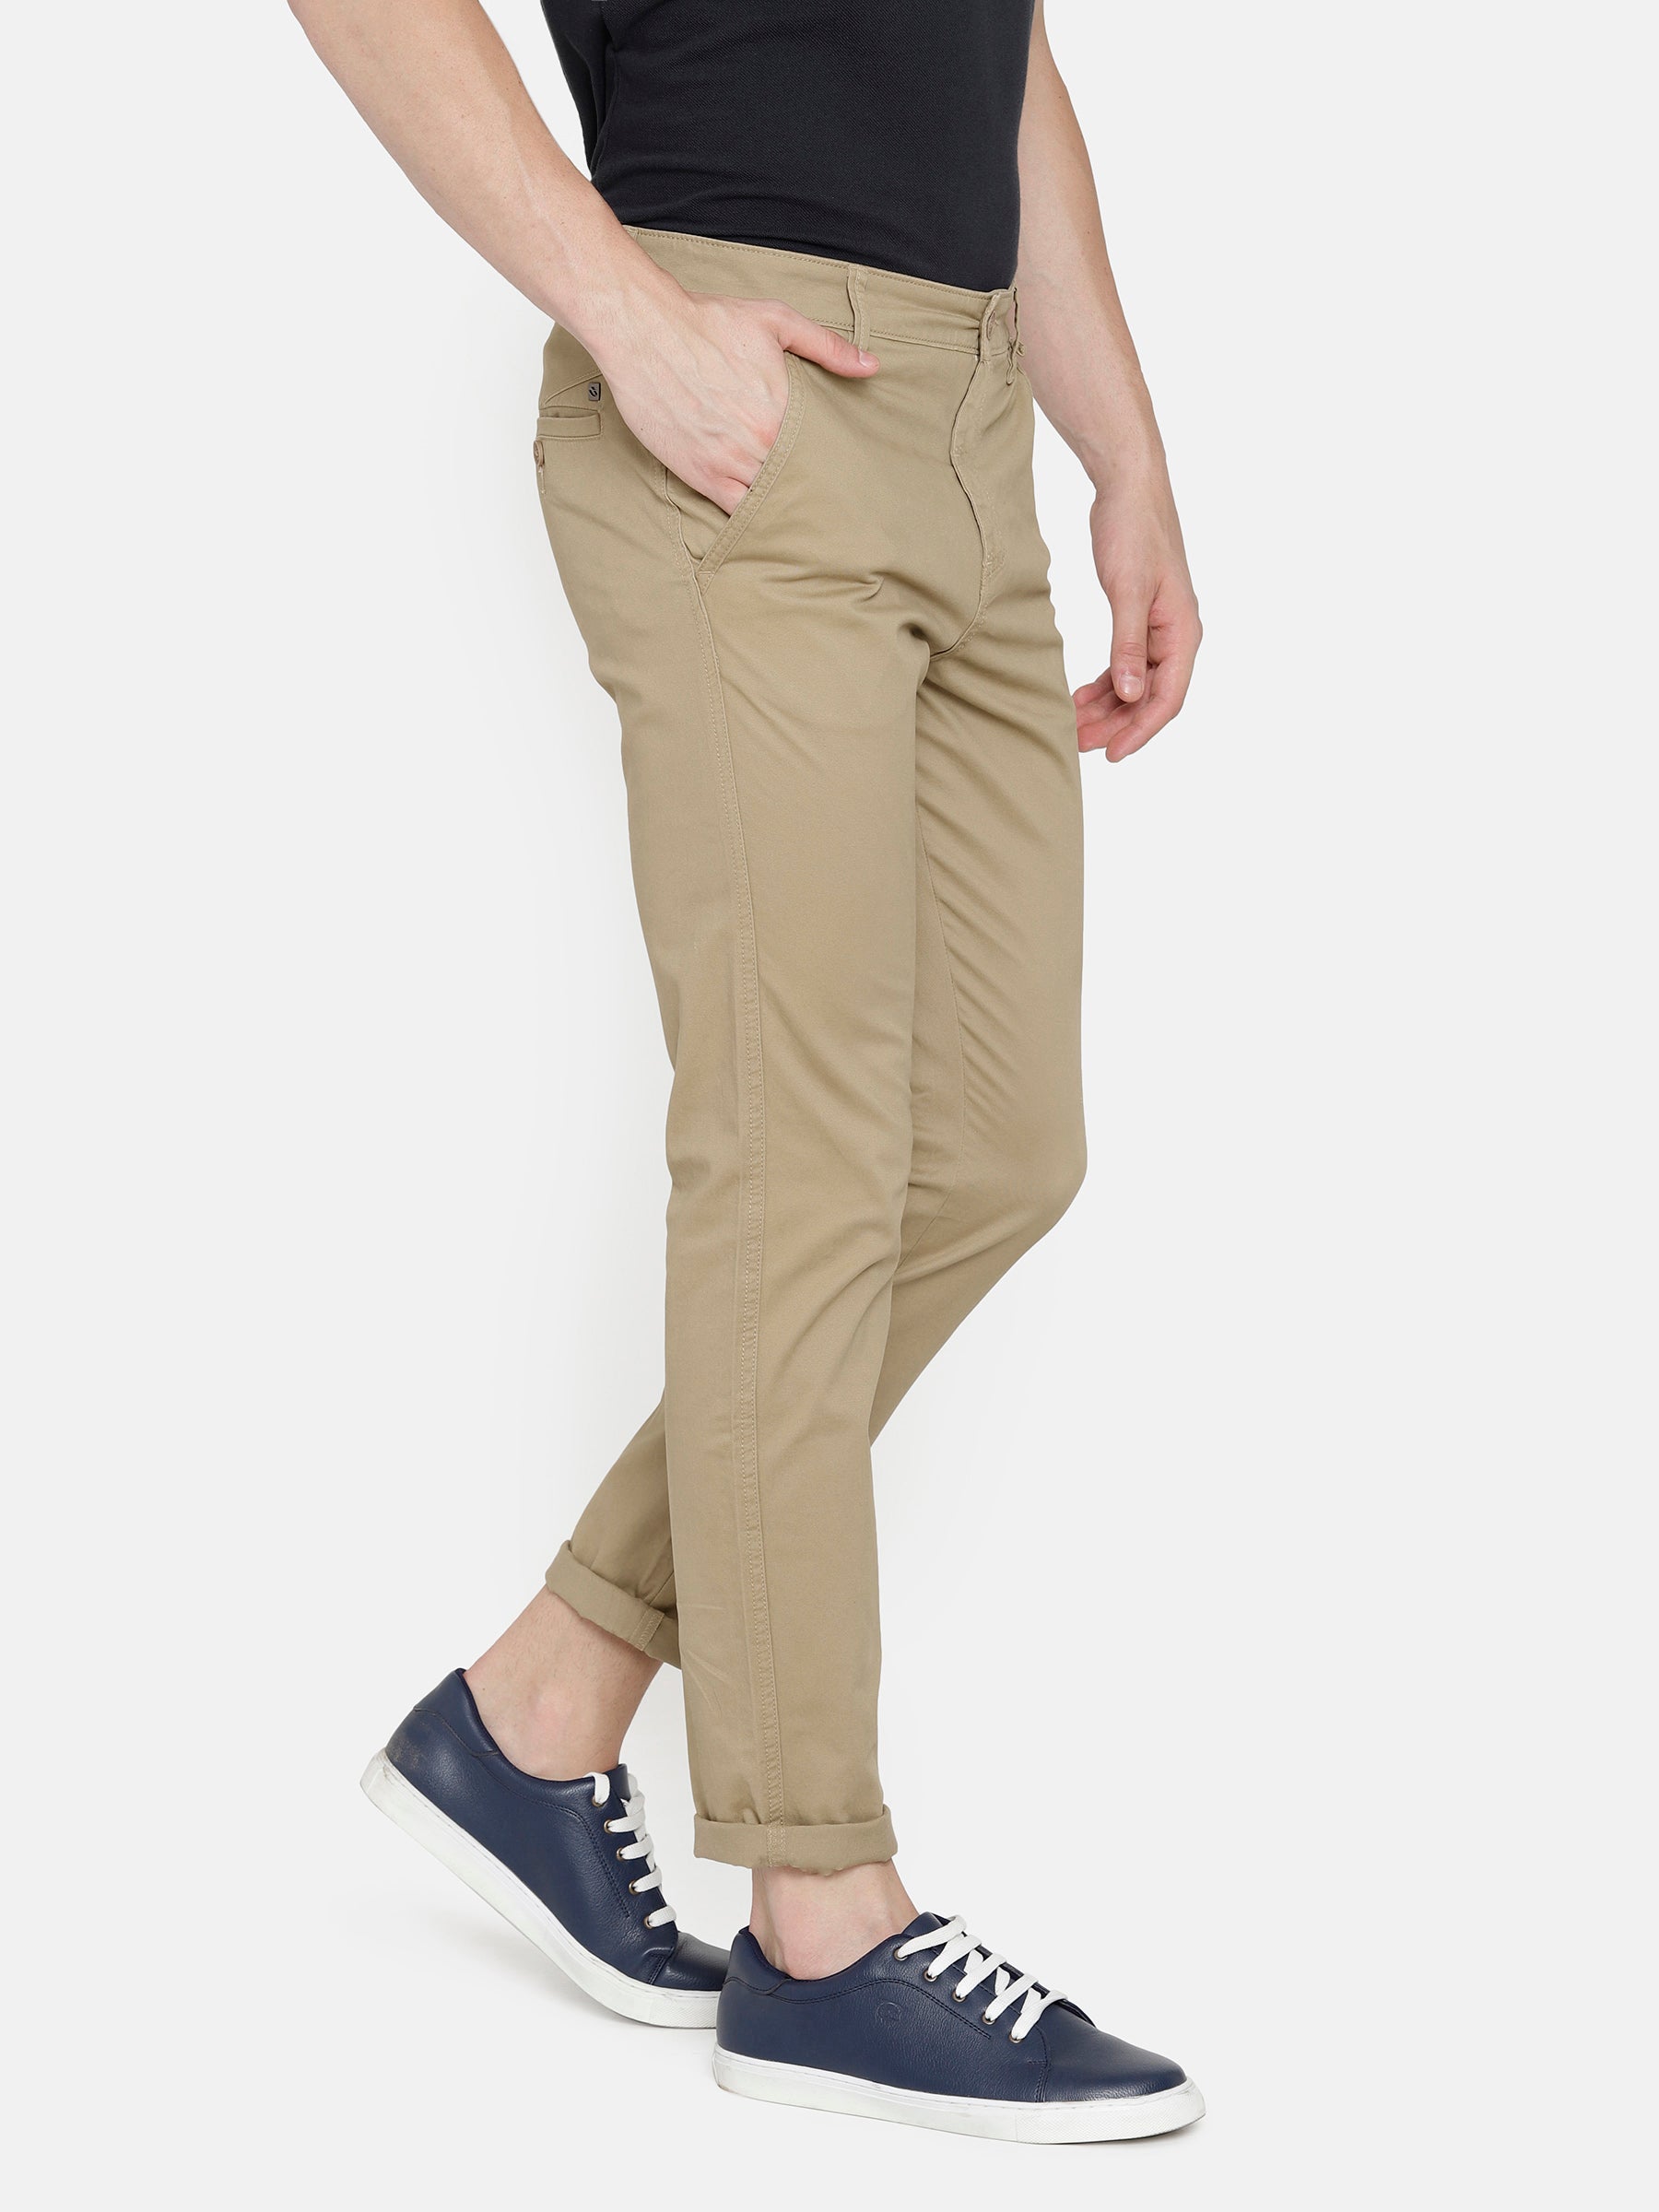 6 colours Rayadurg Cotton Lycra Pant, Formal Wear at Rs 340/piece in  Rayadrug